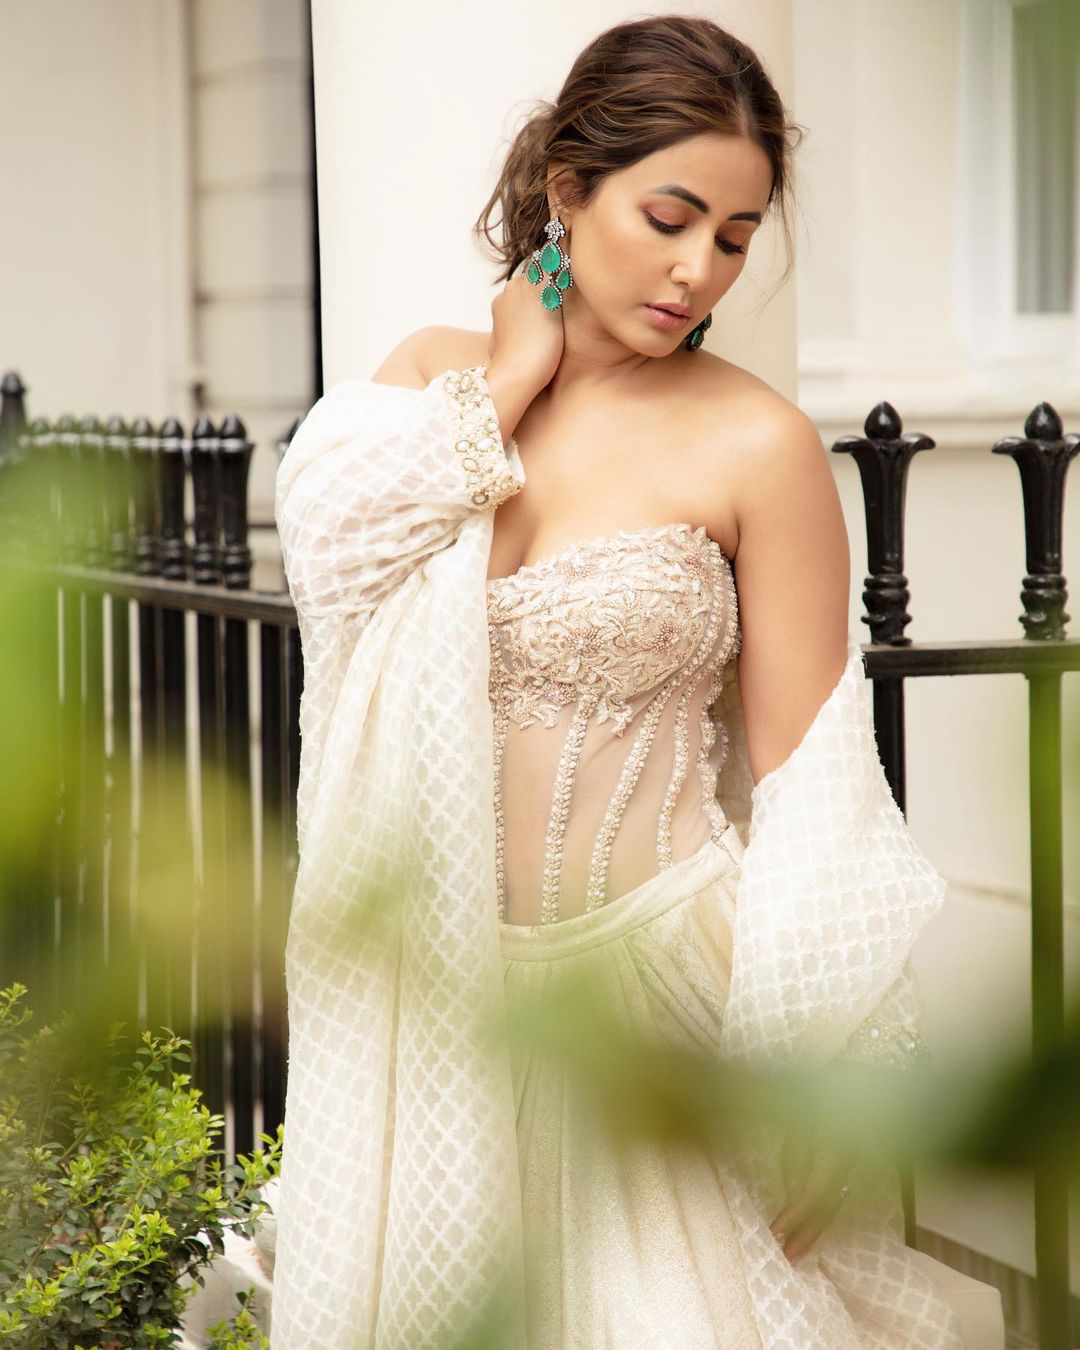 Hina Khan is spilling some glitter and sass in London, before heading to Cannes 2022